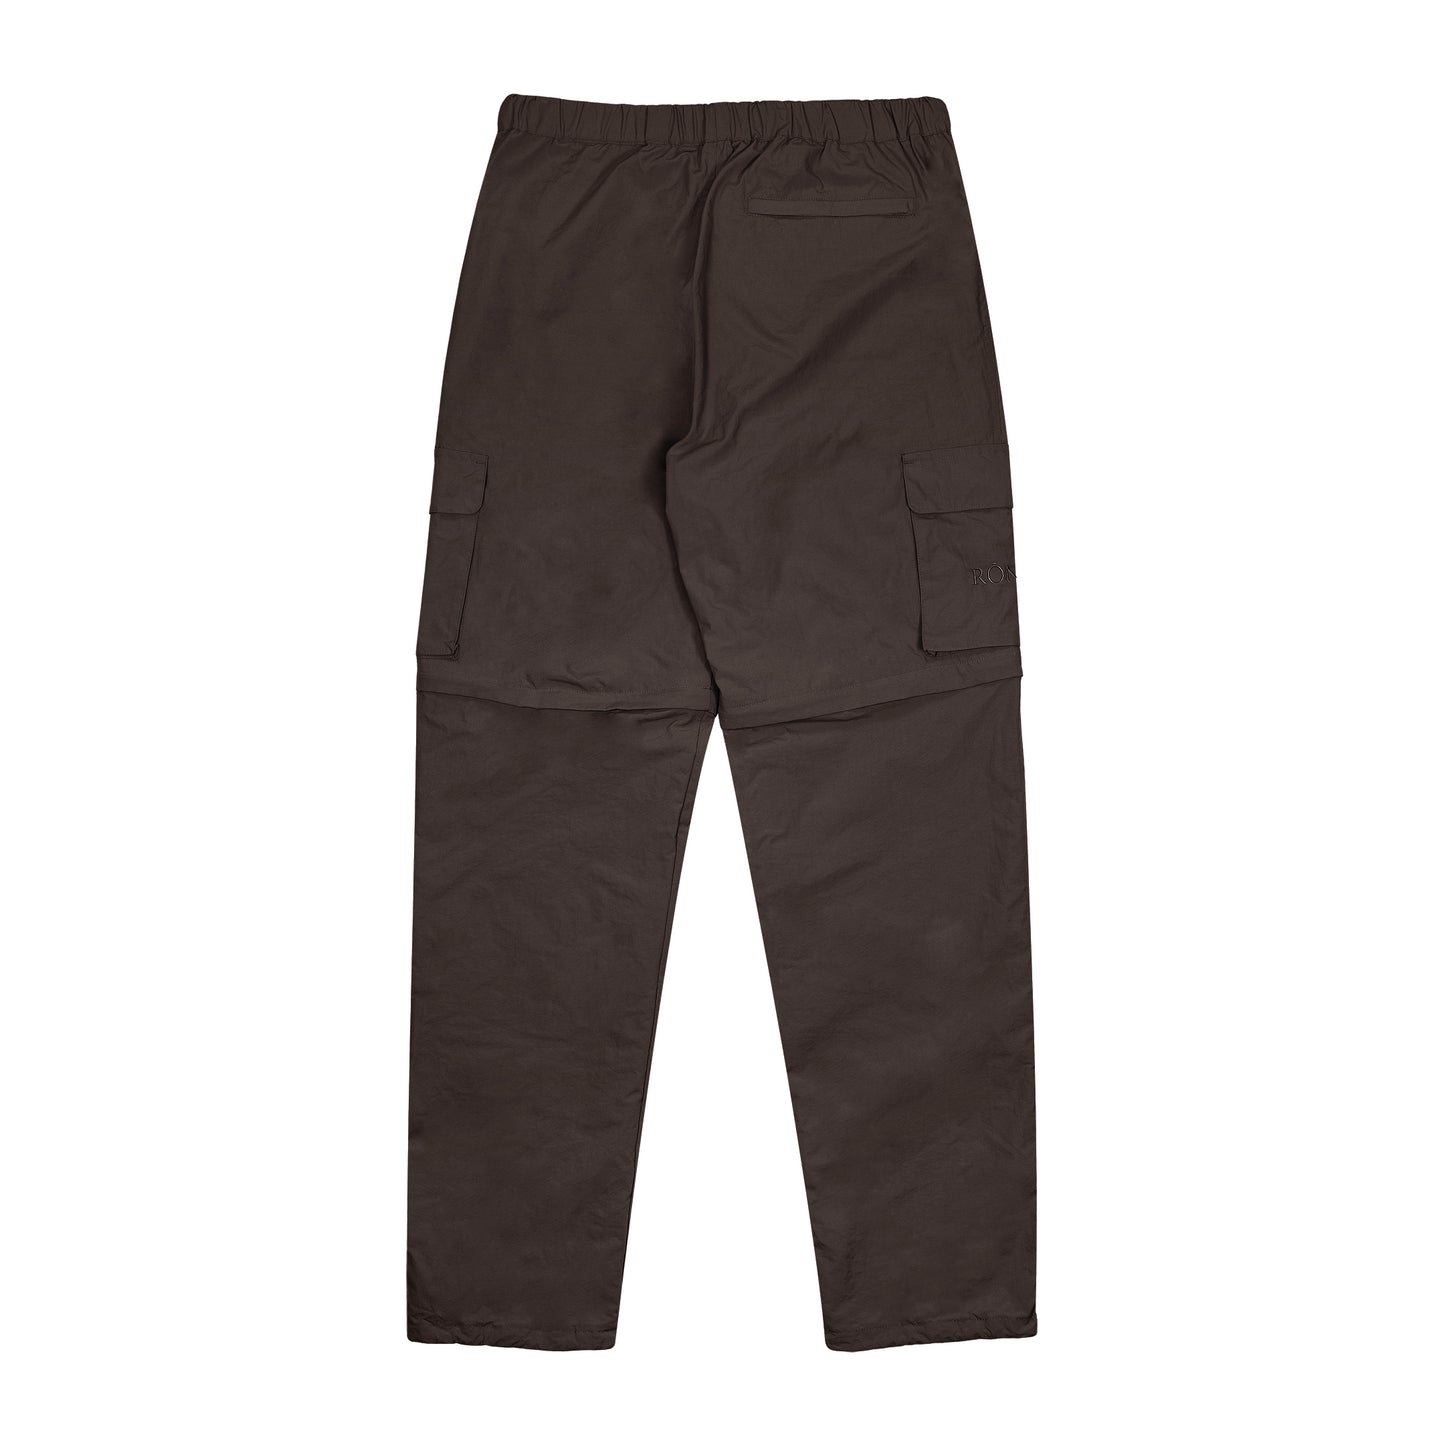 Load image into Gallery viewer, Convertible Nylon Cargo Pant - Dark Chocolate
